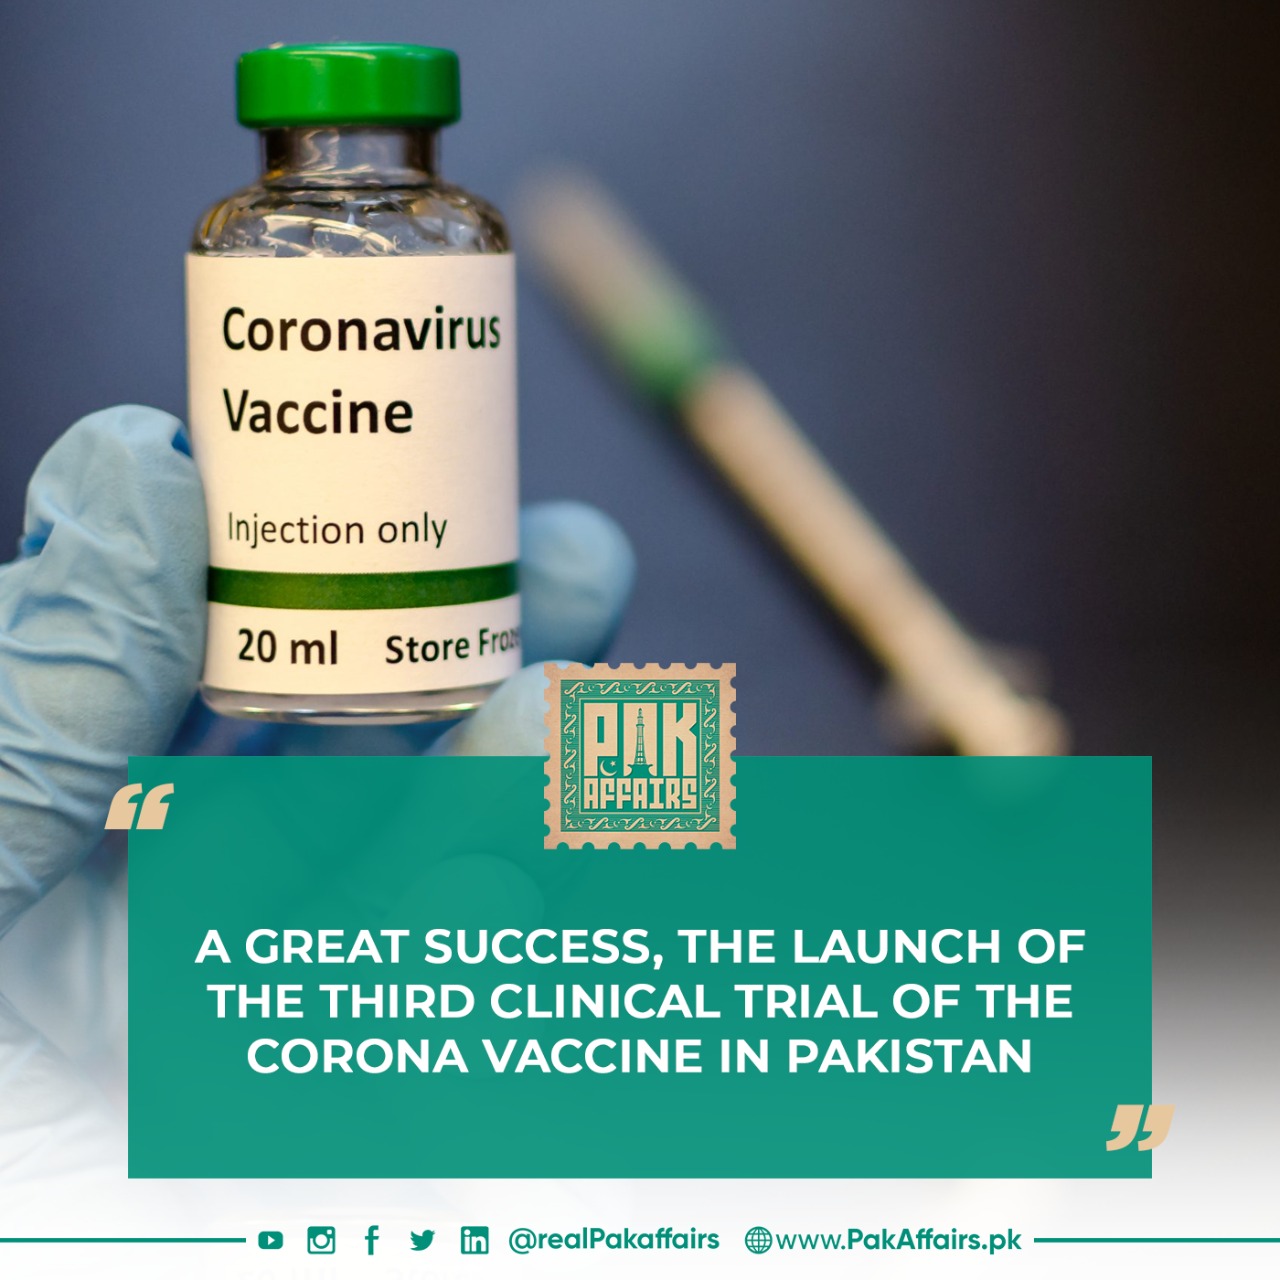 A great success, the launch of the third clinical trial of the corona vaccine in Pakistan